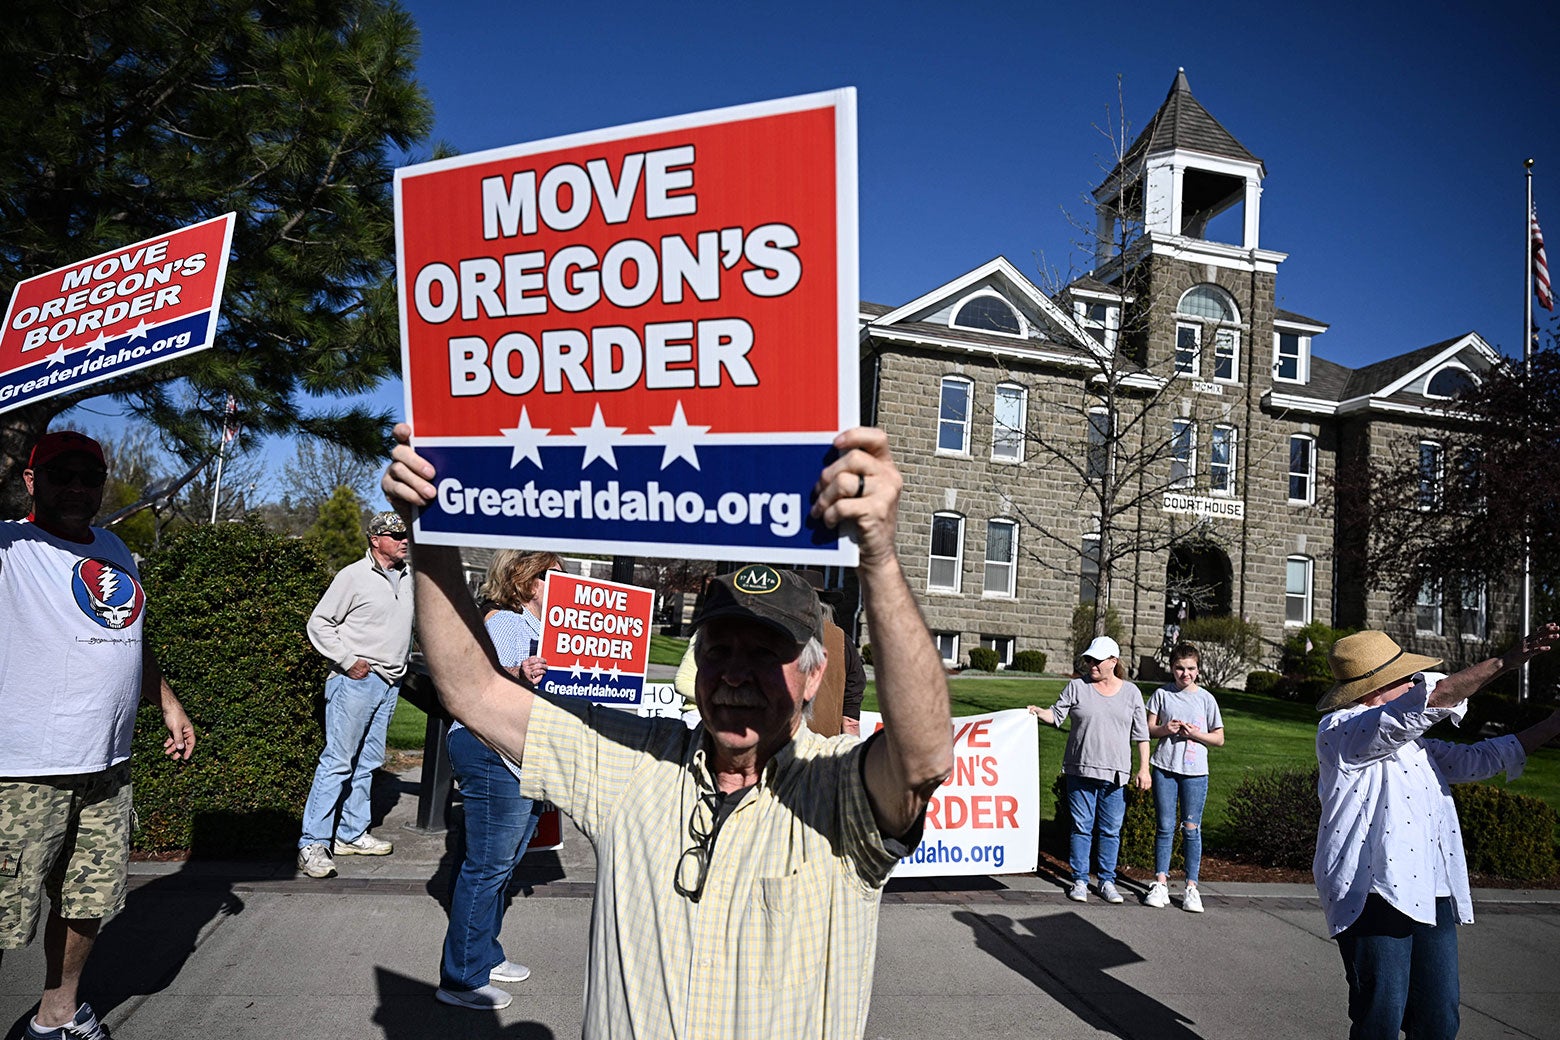 Multiple protestors stand outside a gray government building holding signs that say "Move Oregon's Border: GreaterIdaho.org."